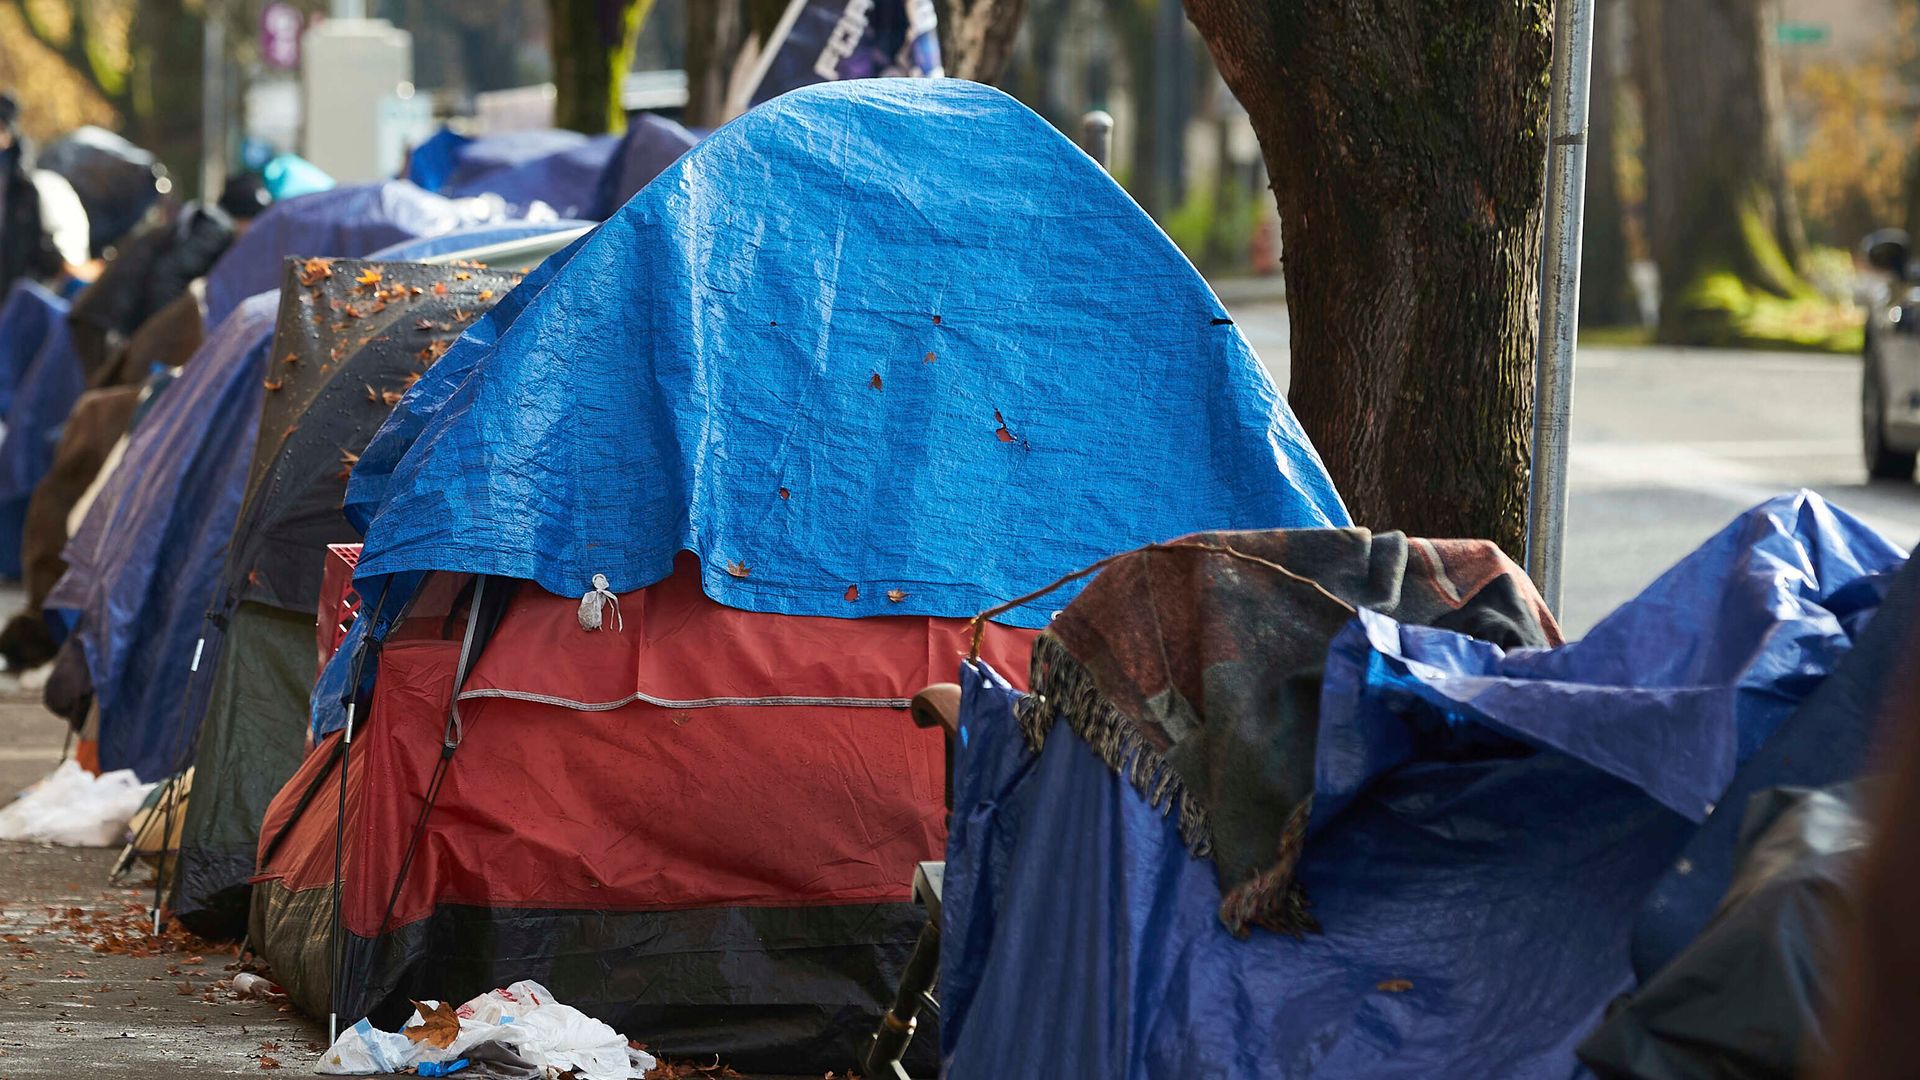 The reason California has so many homeless people is there's a lack of affordable housing — and it's up to the government to change that.